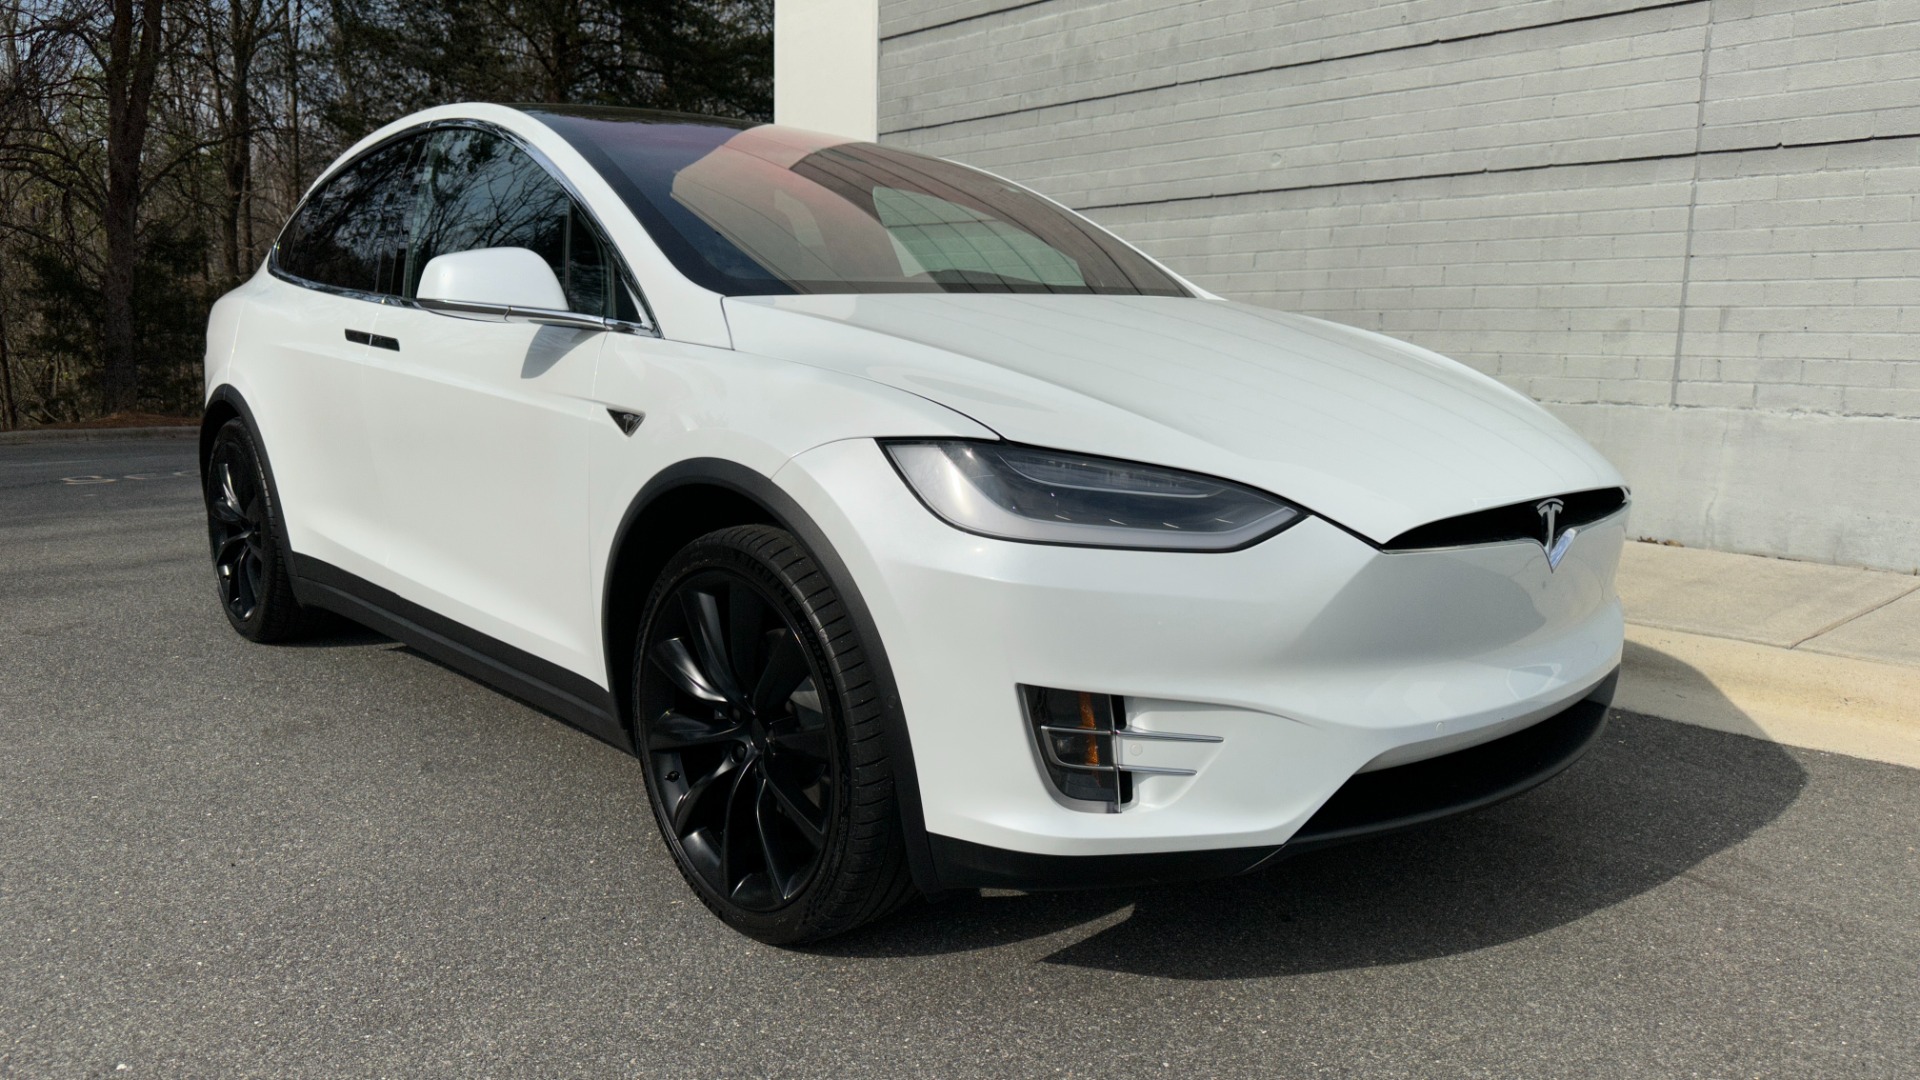 Used 2016 Tesla Model X 90D / HIGHWAY AUTOPILOT / LEATHER / 3RD ROW / CAPTAIN CHAIRS for sale $55,400 at Formula Imports in Charlotte NC 28227 5